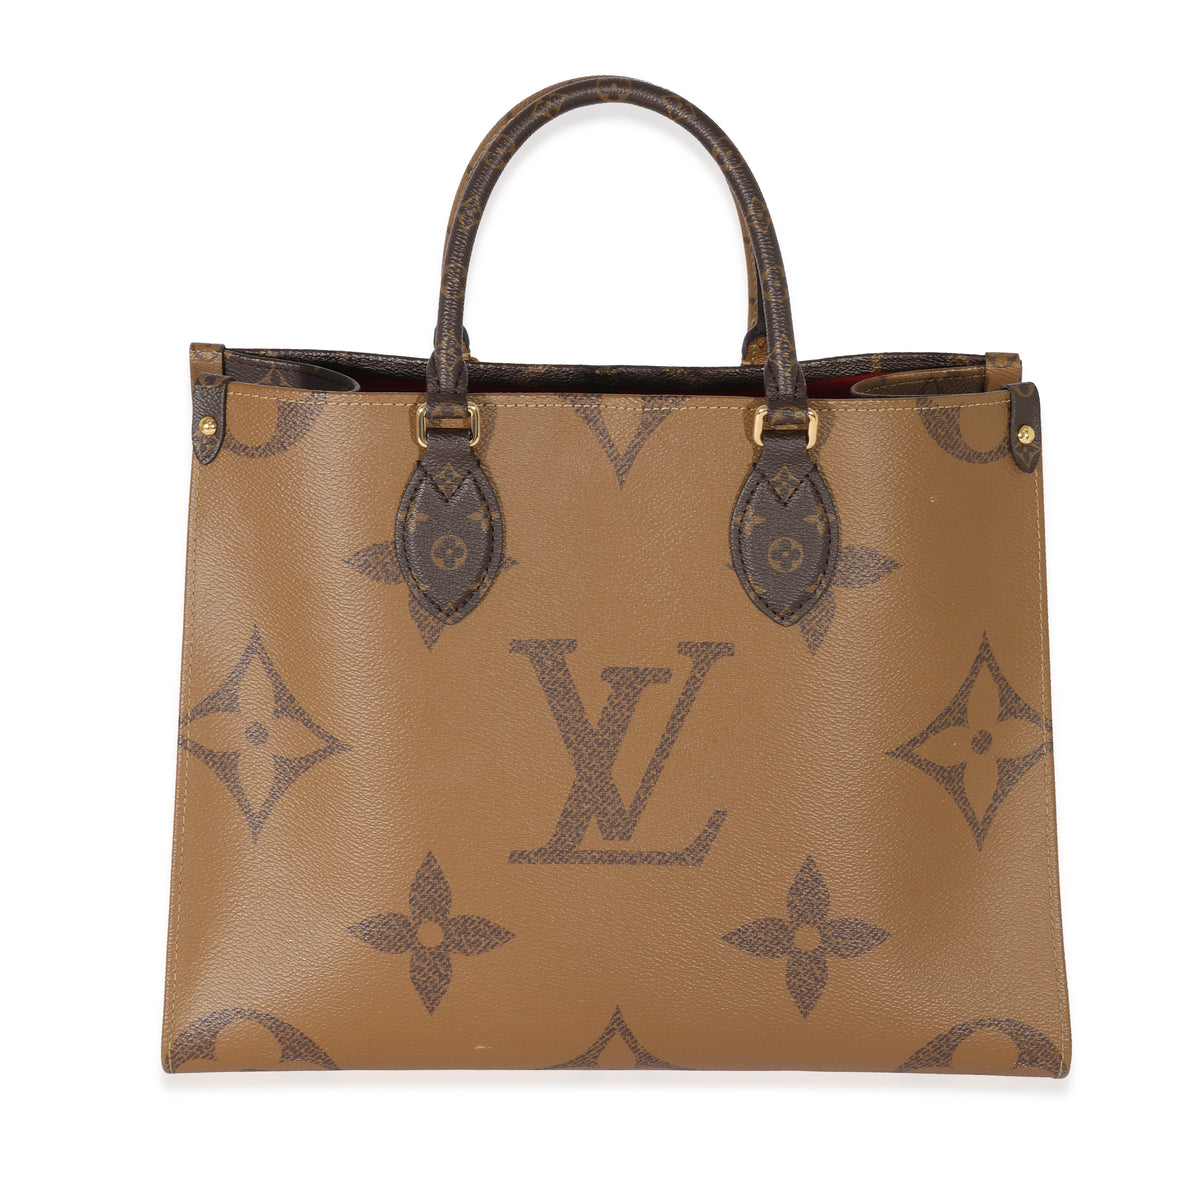 Louis Vuitton - Authenticated Onthego Handbag - Cloth Brown for Women, Very Good Condition